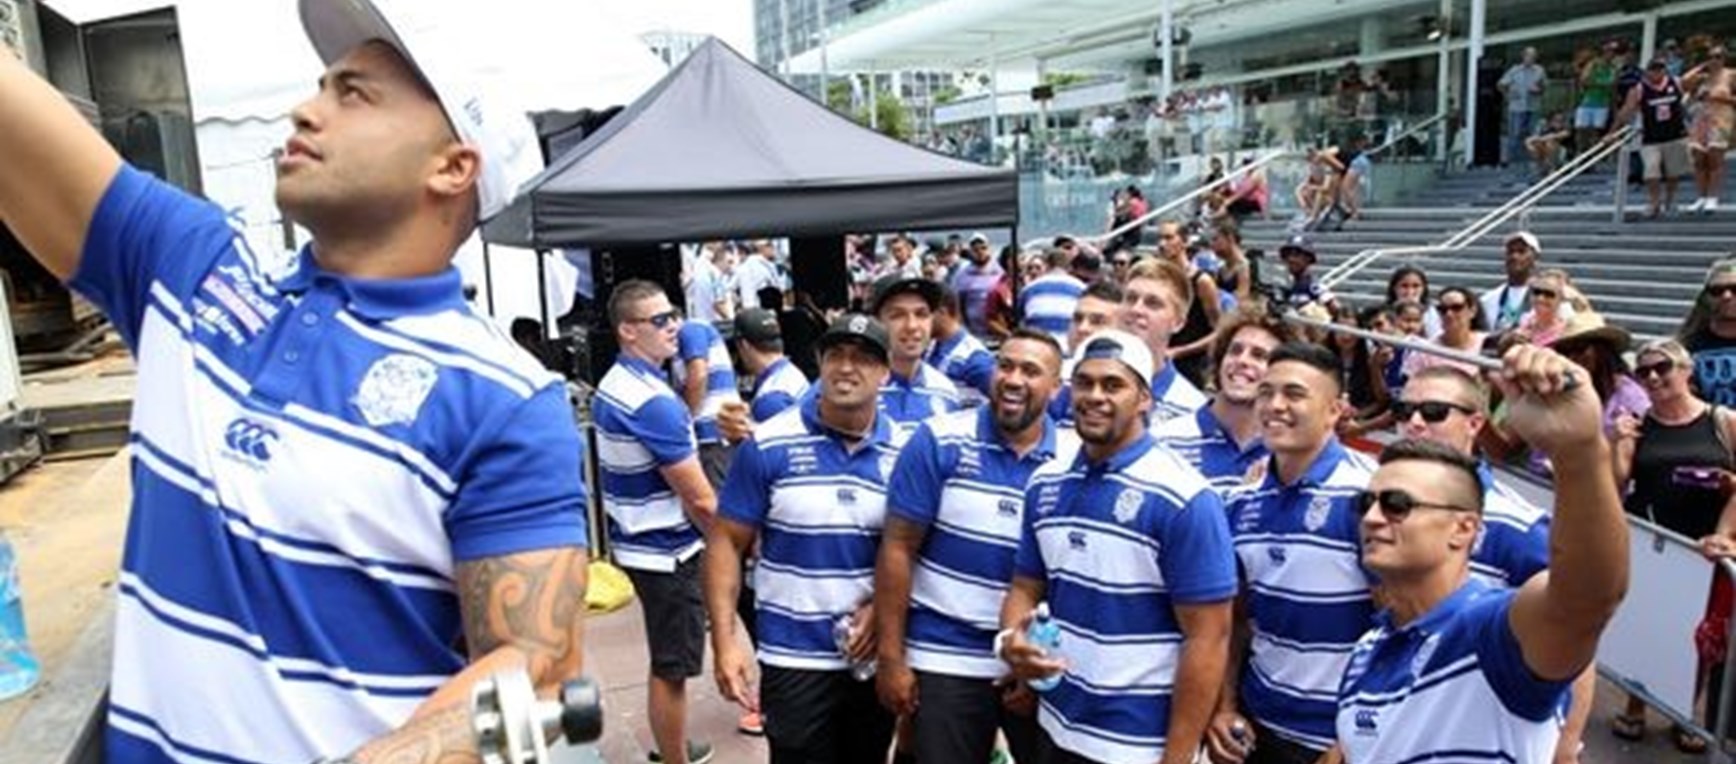 Auckland Nines Fan Day in Pics